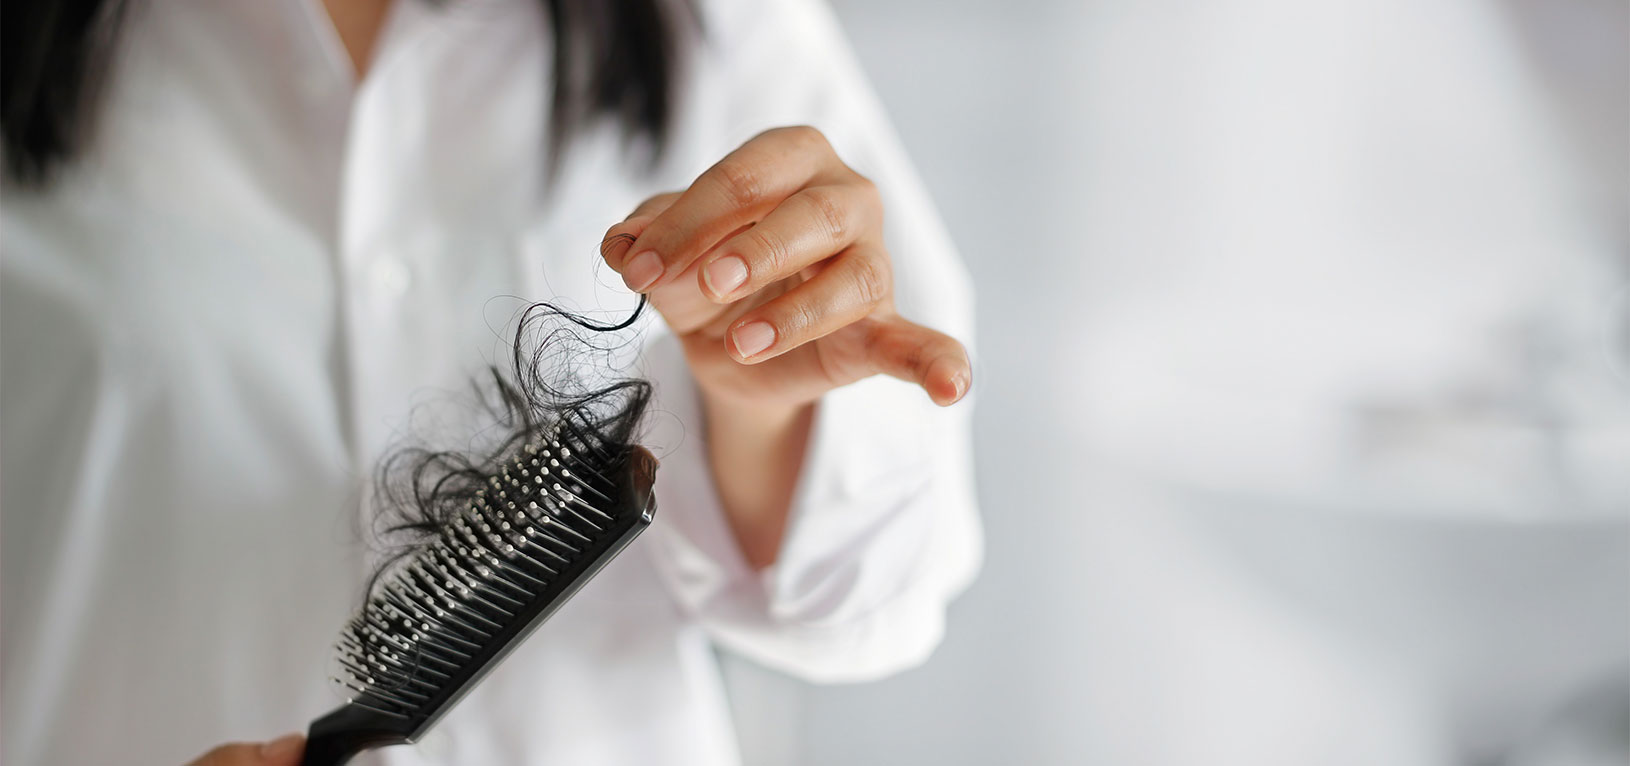 Oklahoma City Hair Treatments, Hair Replacement and Hair Loss Specialists